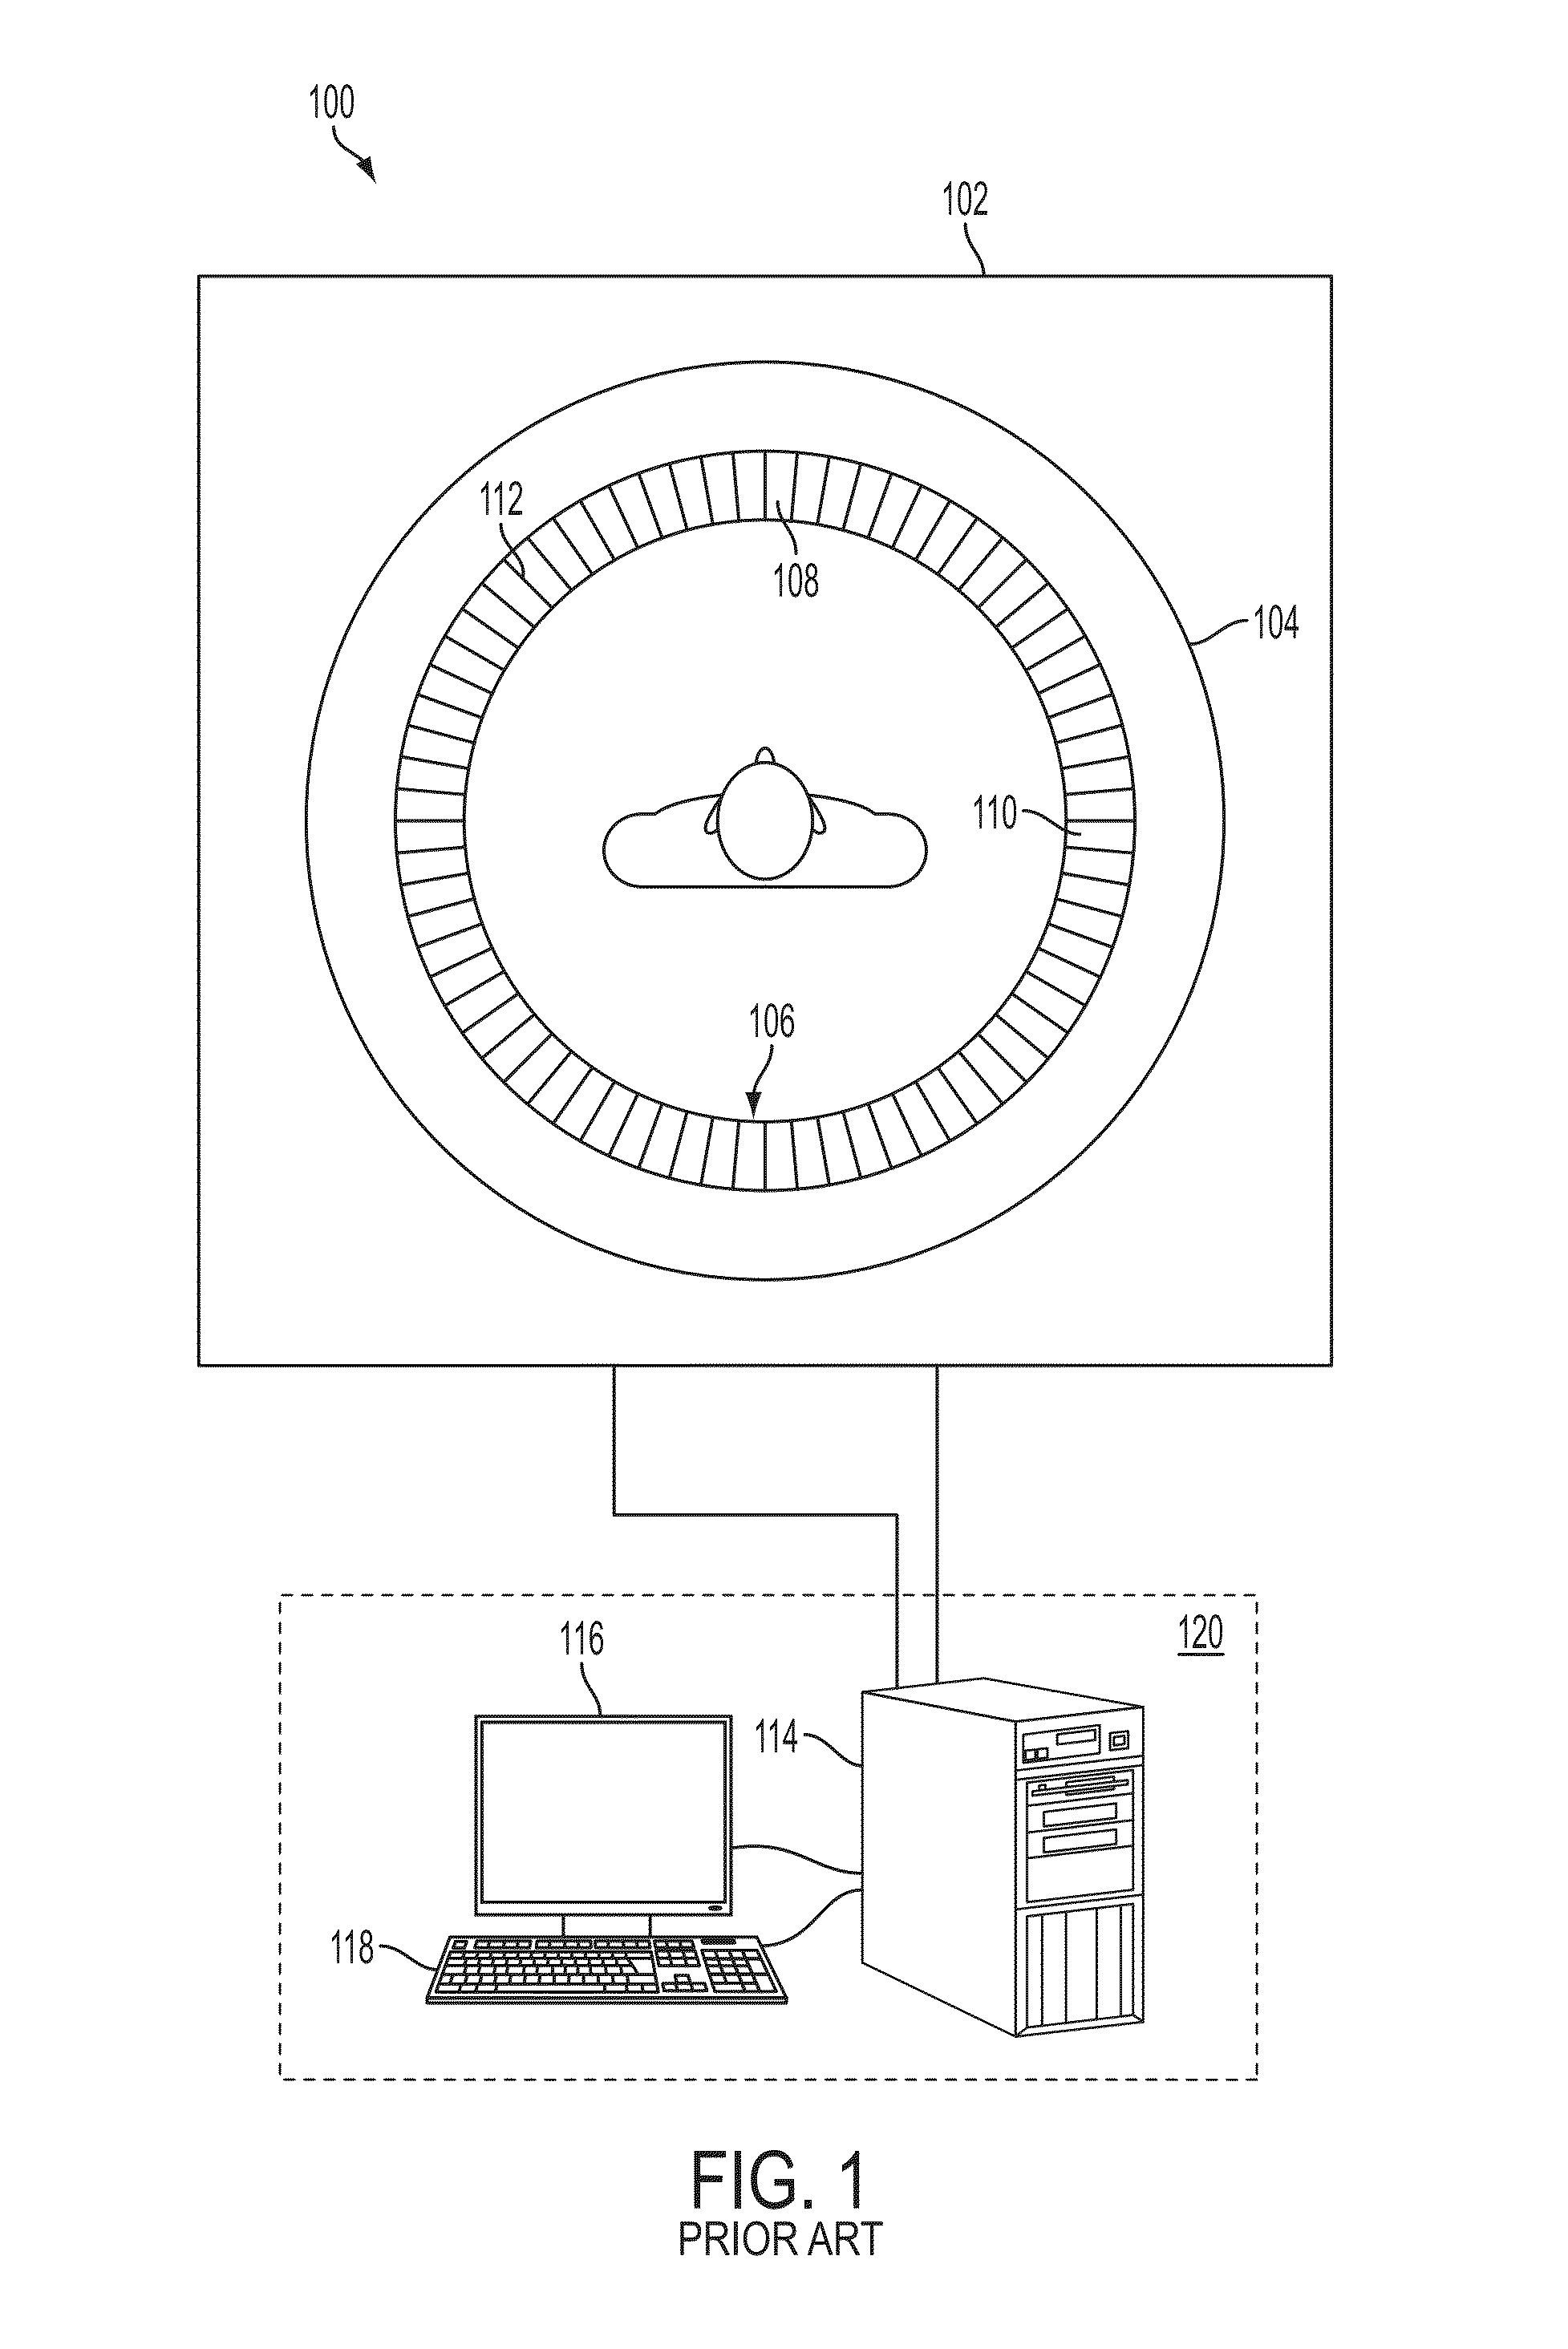 PET Scanner with Emission and Transmission Structures in a Checkerboard Configuration